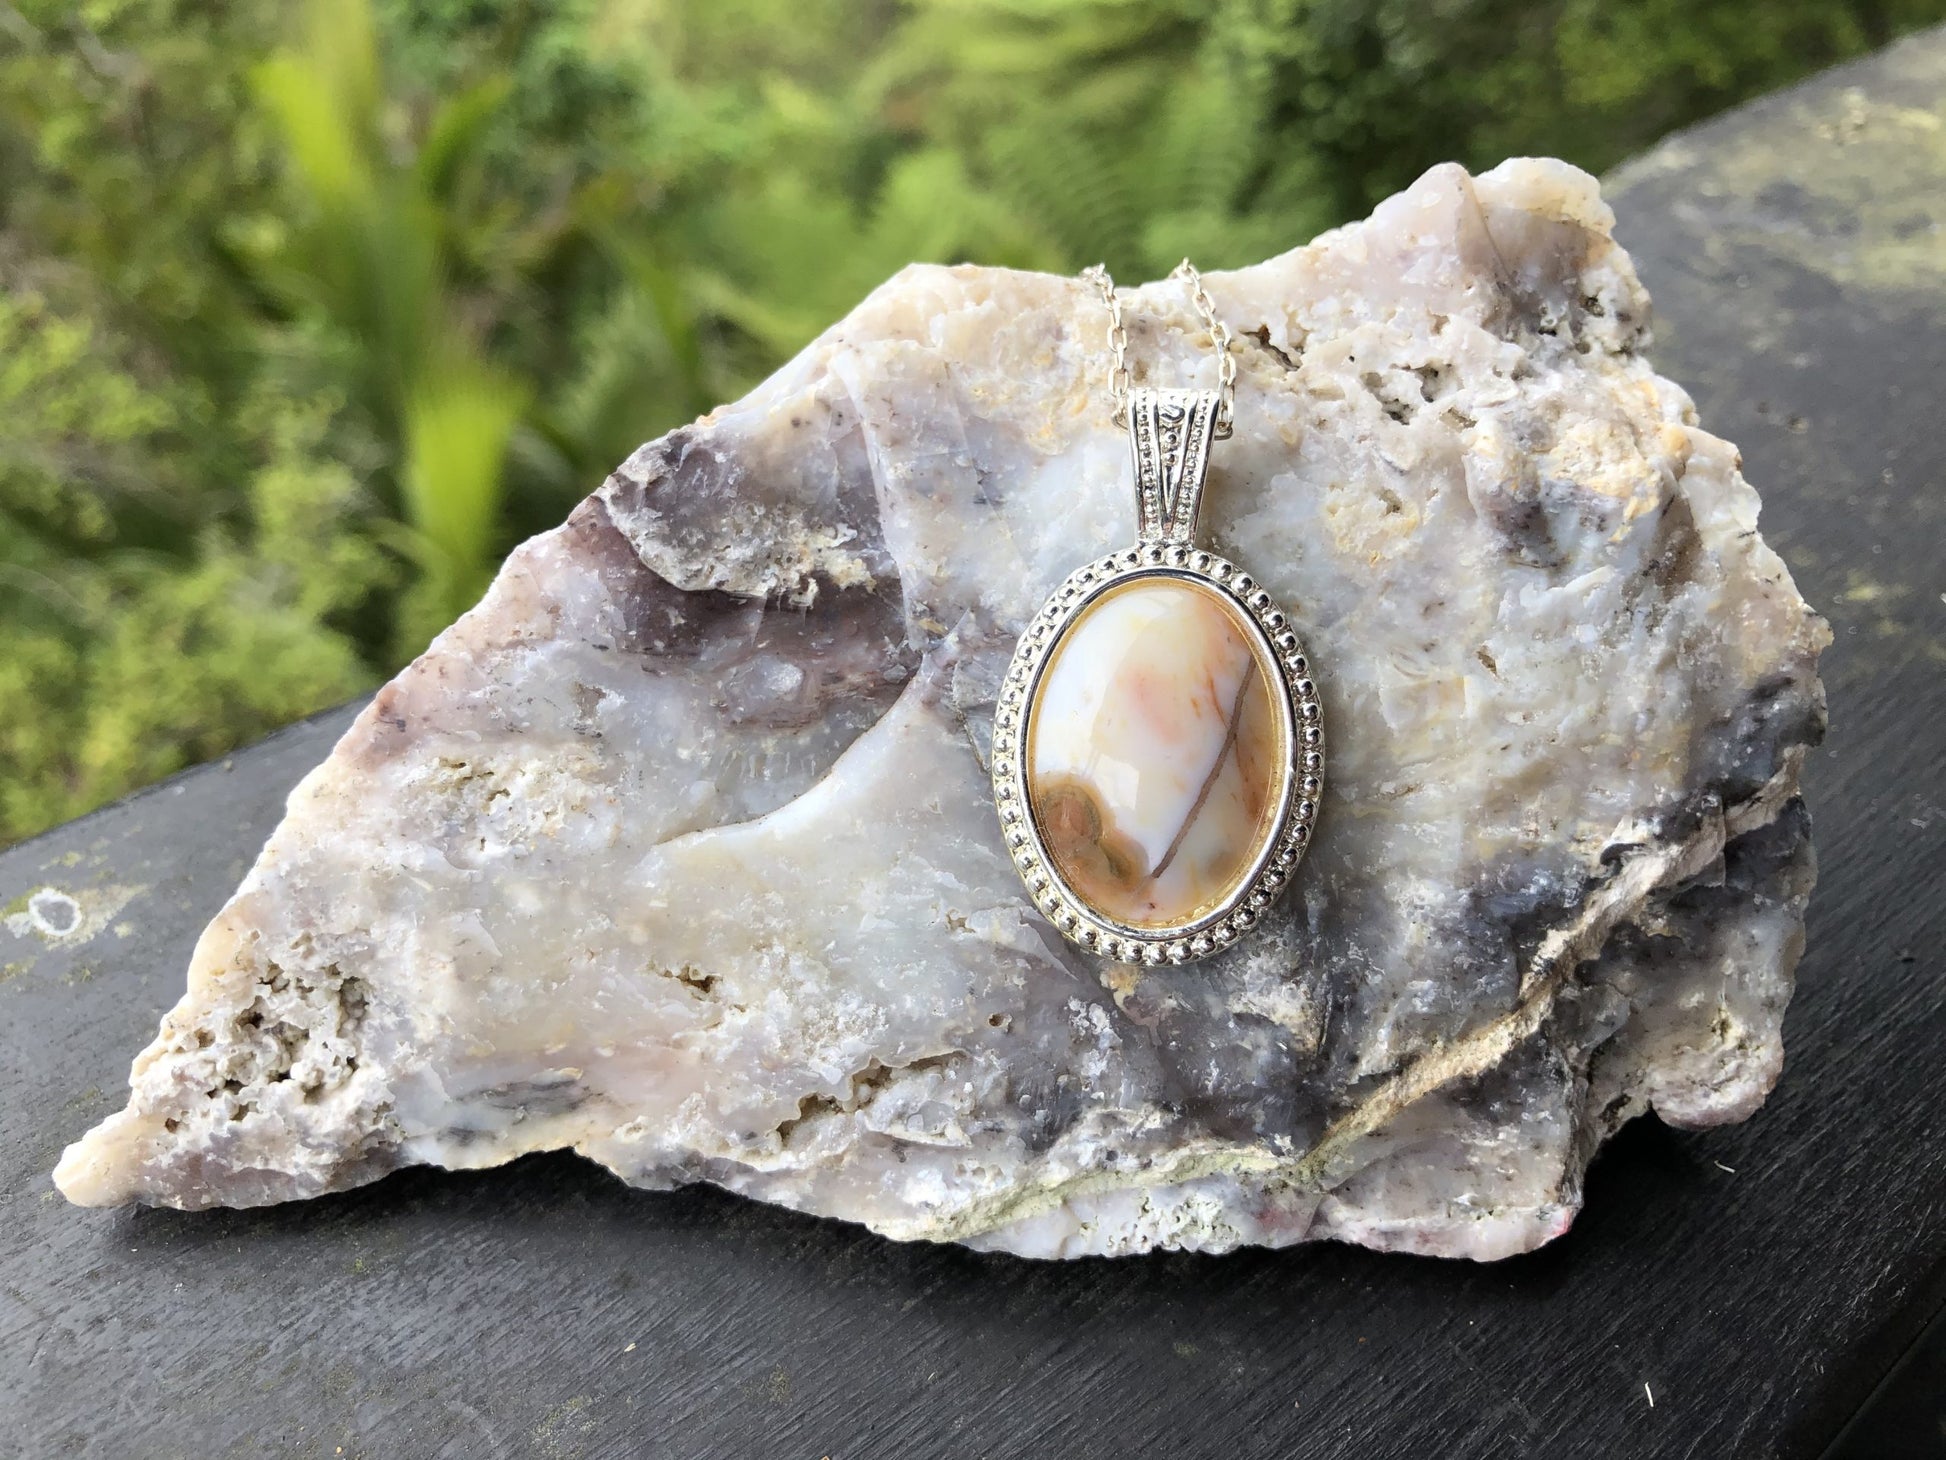 Necklace with Ocean Jasper from Madegascar, white with red and brown patterns, hand polished to a 25x18mm cabochon and set in a silver plated setting with 19 inch chain on Cinebar